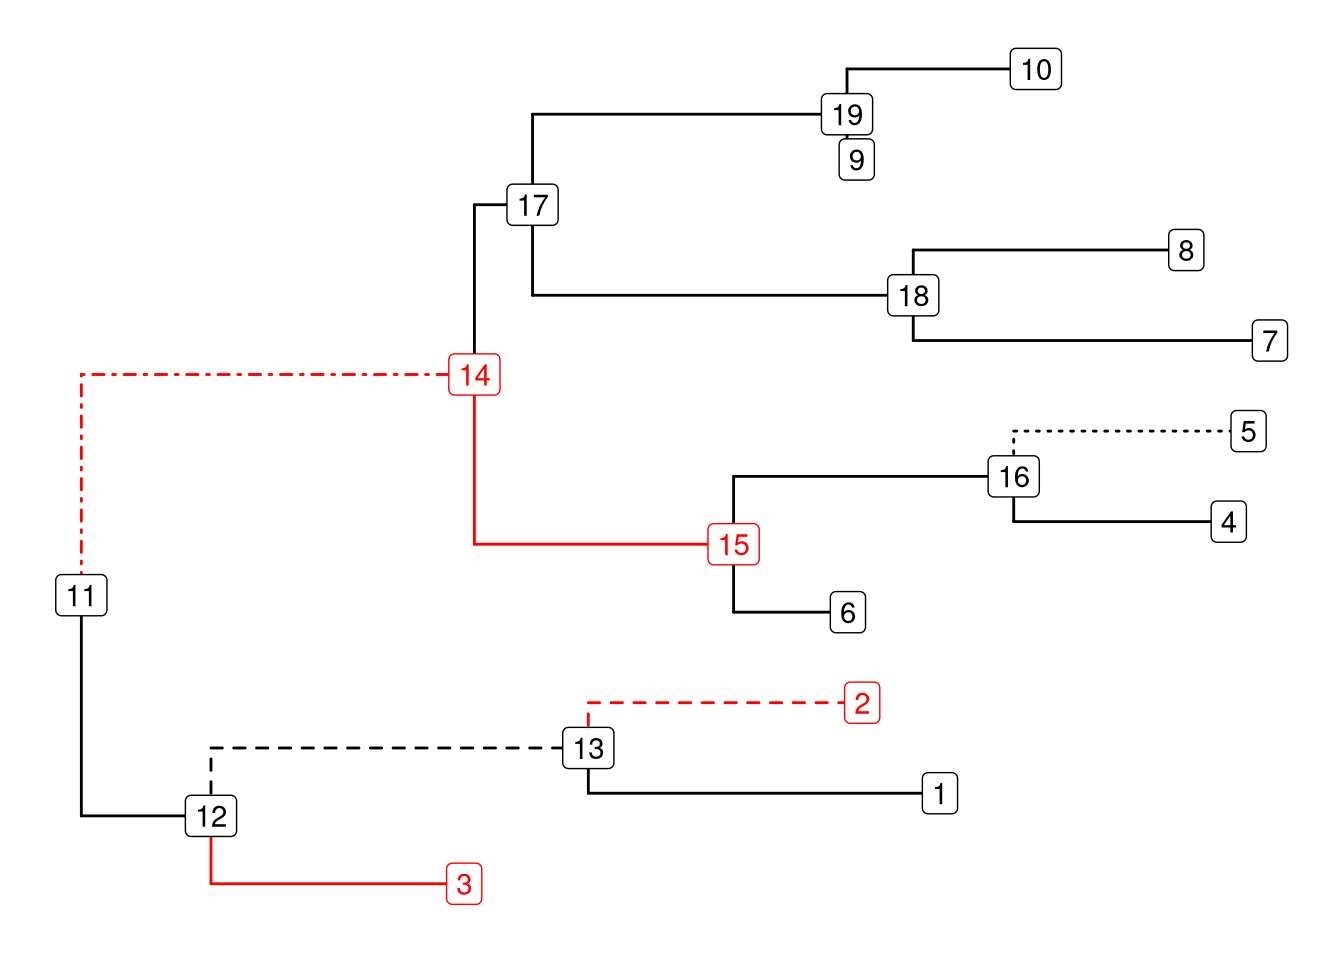 Change colours and line types of specific branches.